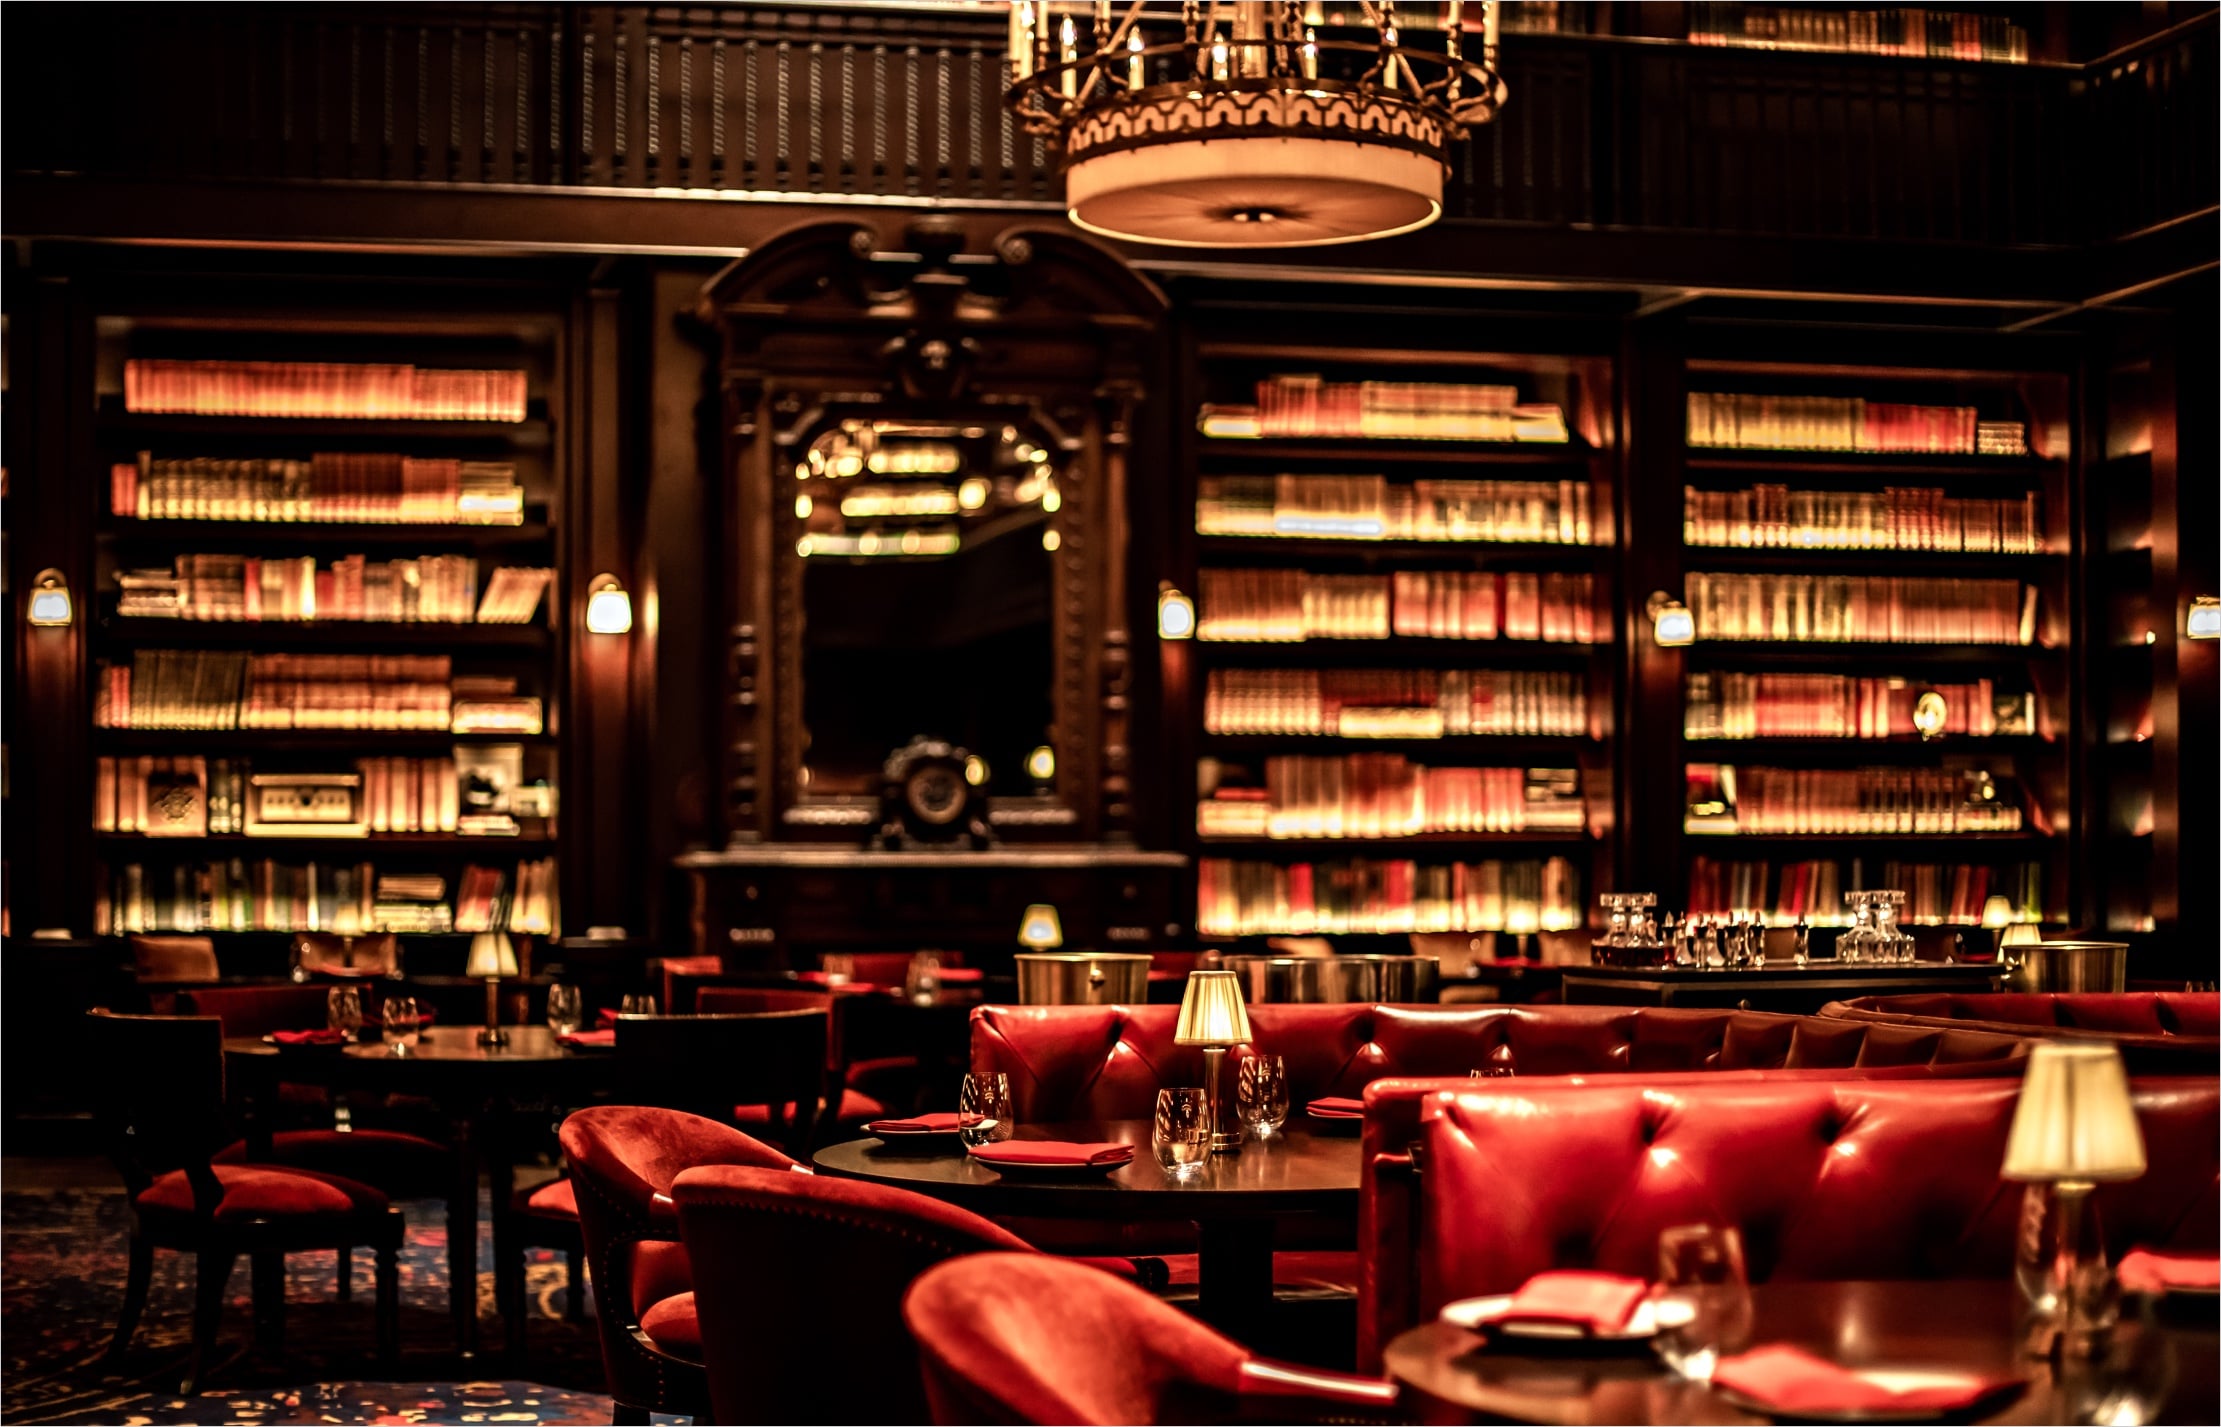 Interior view of The Restaurant, with dark wood dining tables and red velvet dining chairs, red leather tufted dining booths, and floor to ceiling bookshelves.